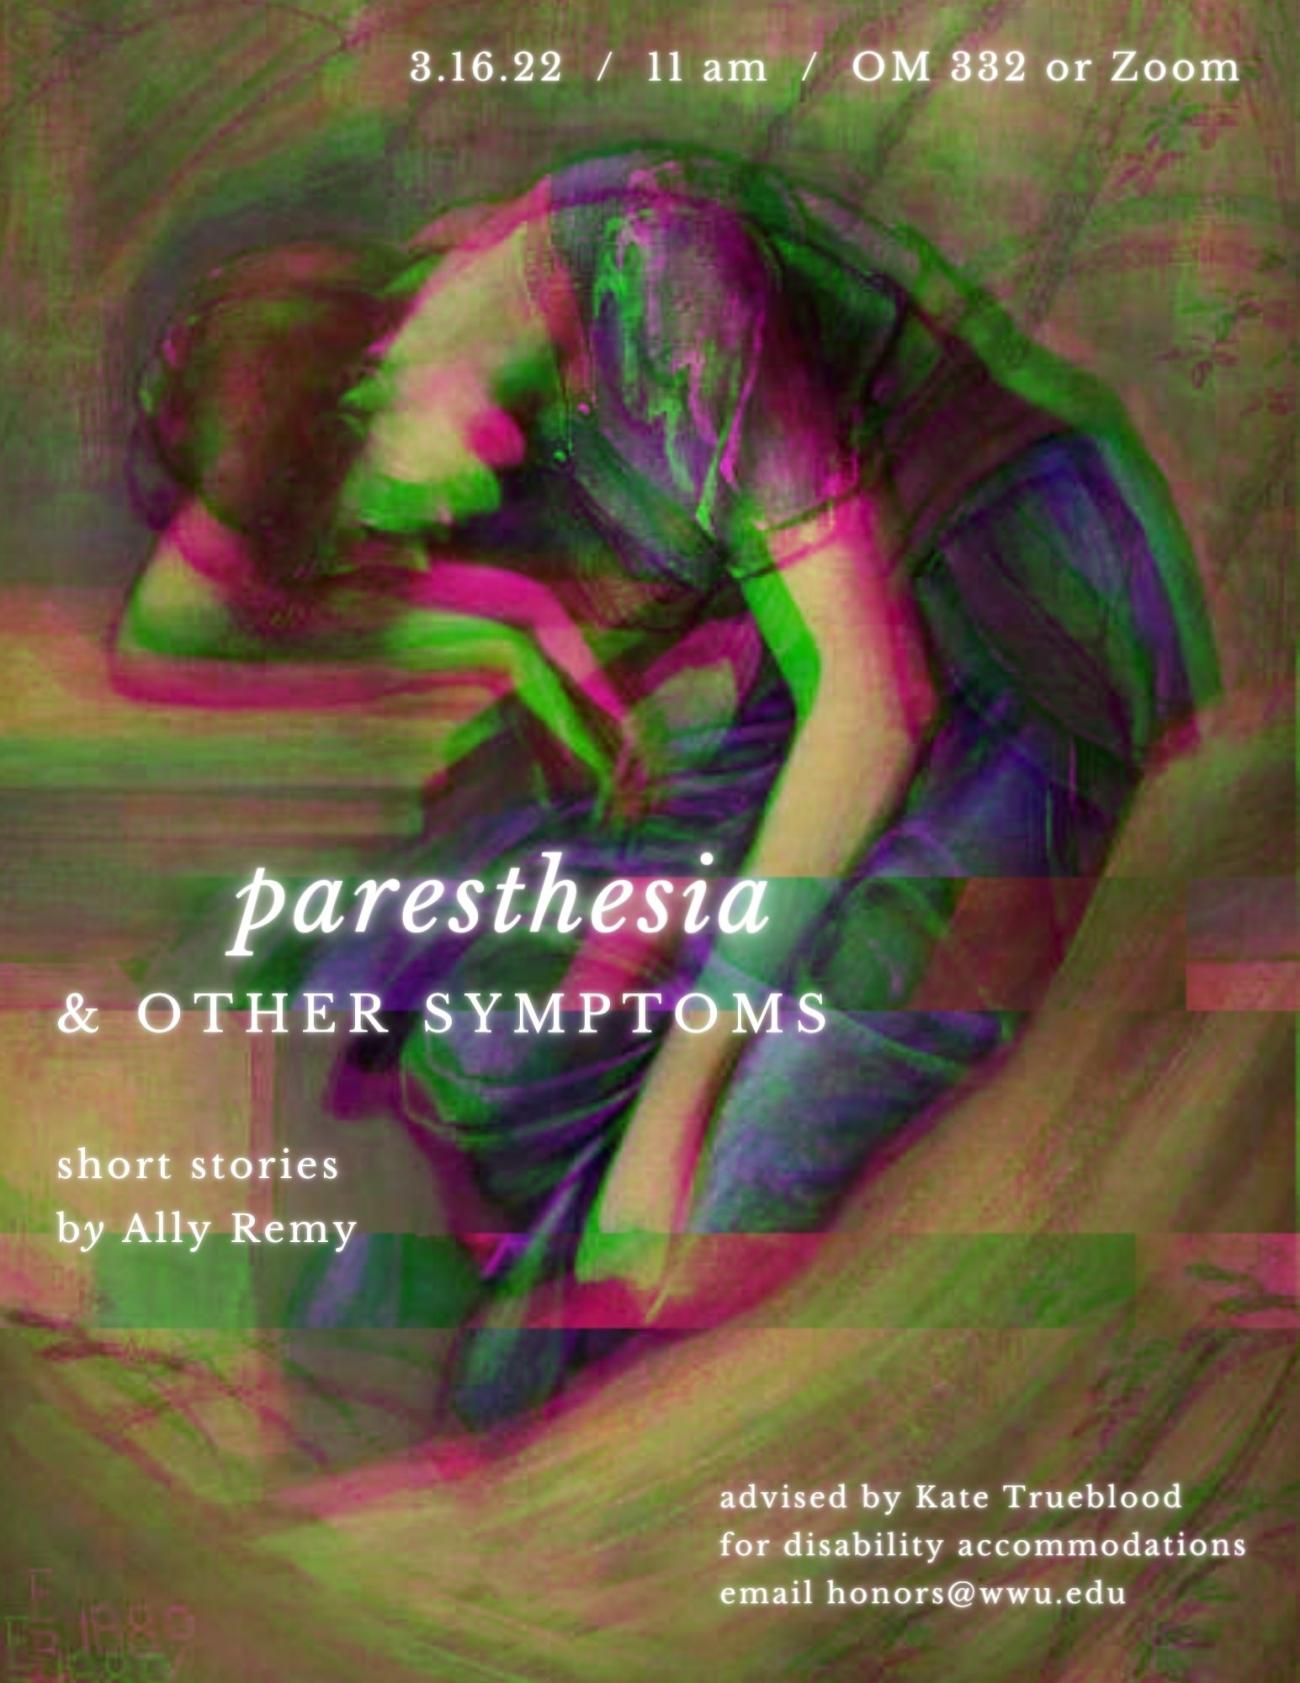 A poster with a warped image of a woman in a long dress leaning on a table as if exhausted. The text reads: "Paresthesia & Other Symptoms, Short Stories by Ally Remy. 3/16/22, 11 am, OM 330C or Zoom. Advised by Kate Trueblood. For disability accommodations email honors@wwu.edu."